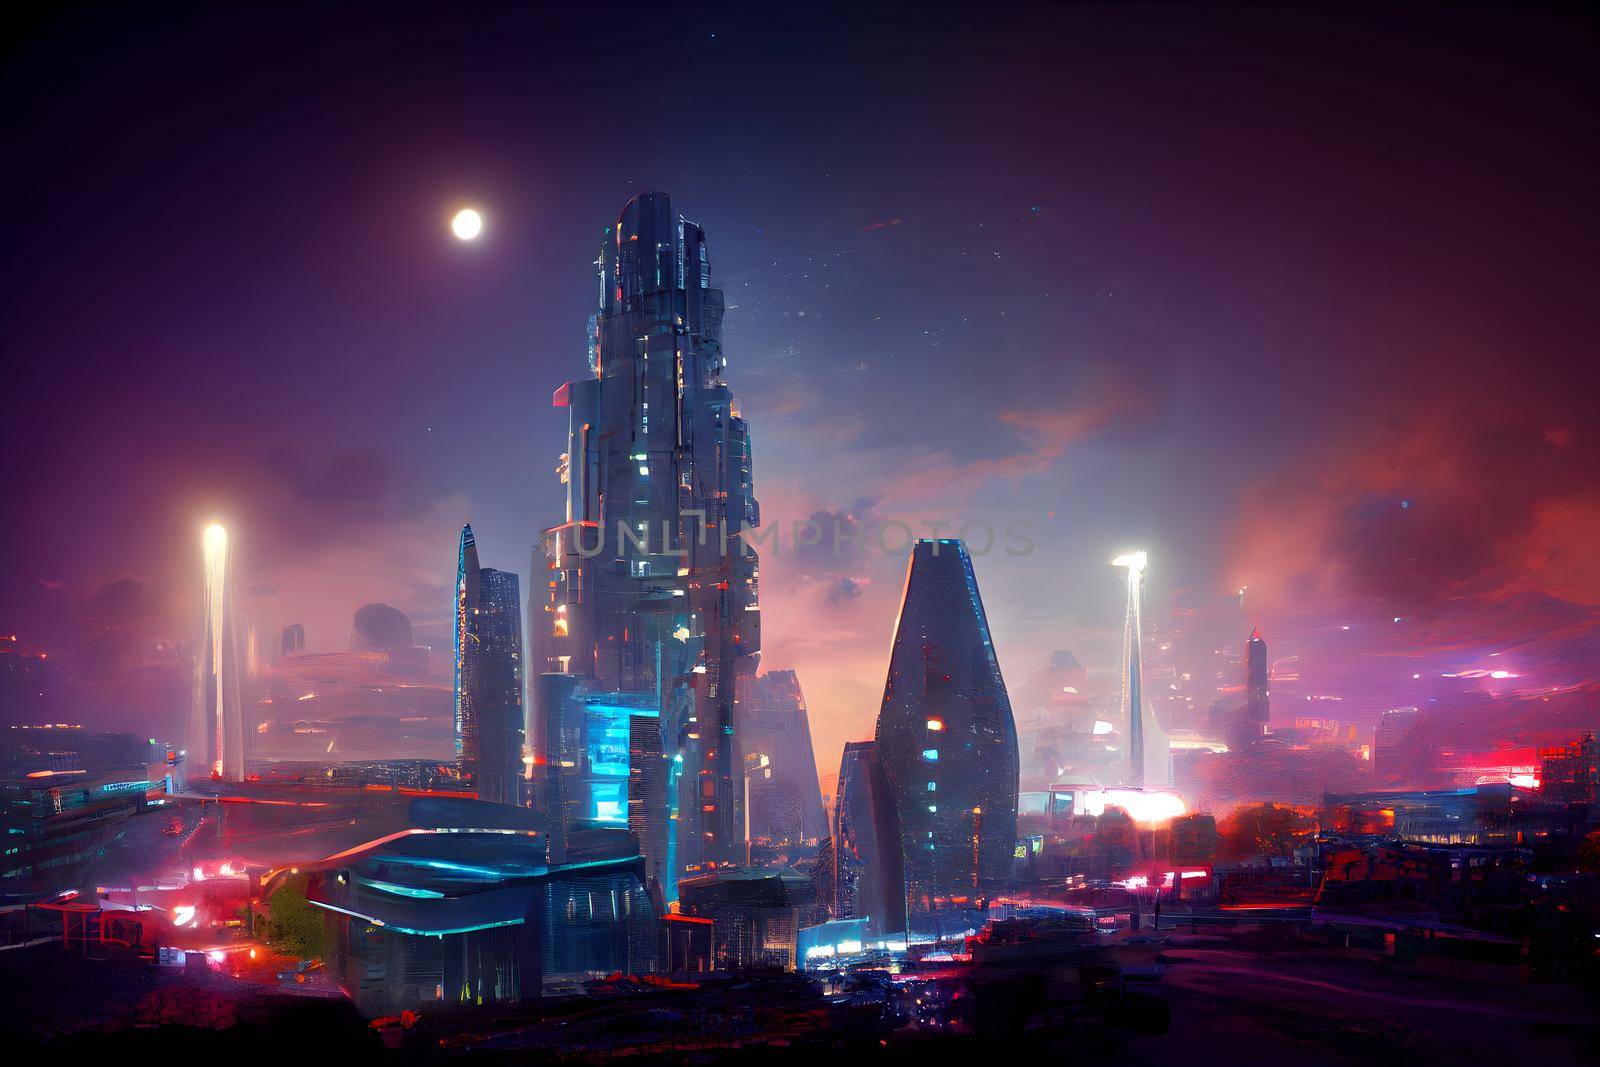 abstract futuristic night utopian cityscape, neural network generated art. Digitally generated image. Not based on any actual scene or pattern.